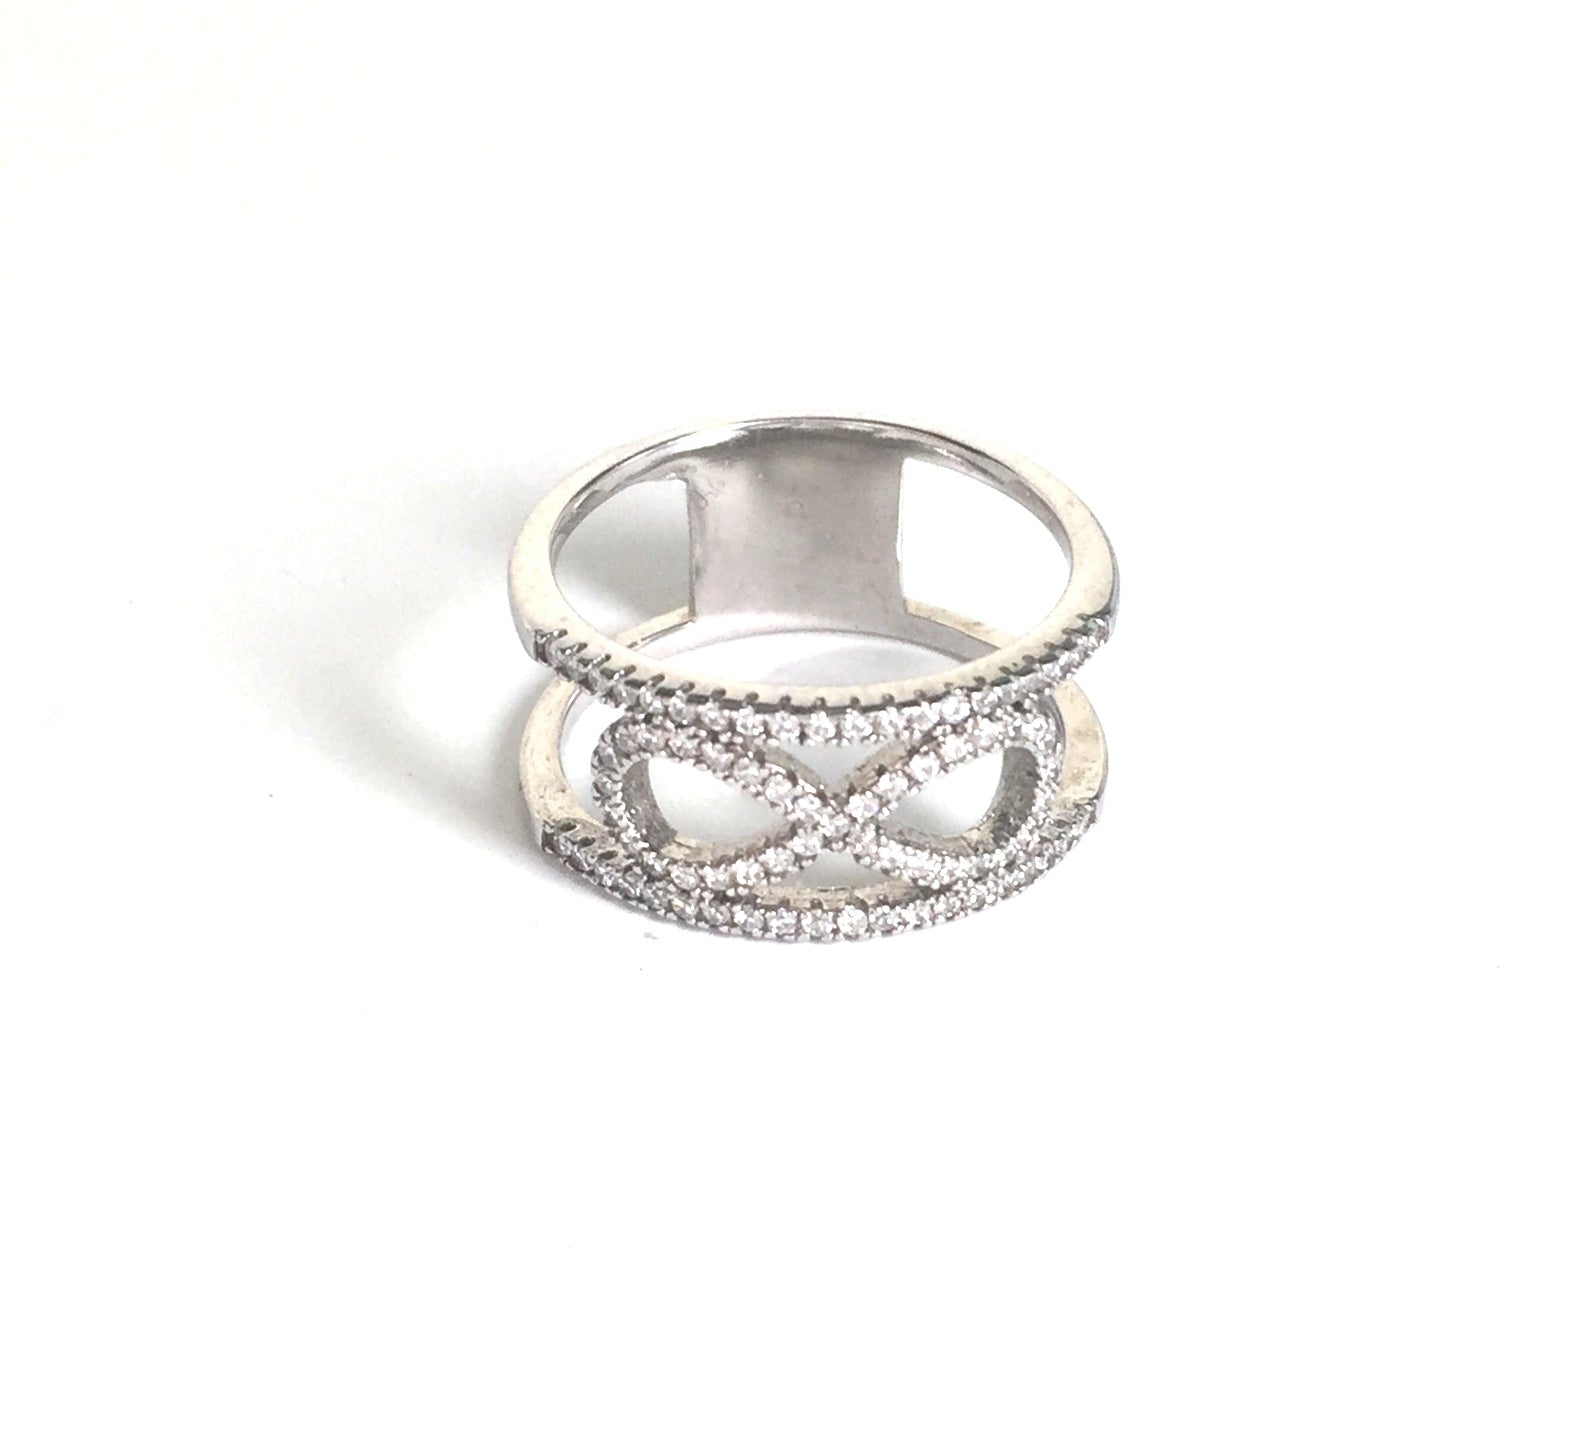 INFINITY STERLING SILVER RING